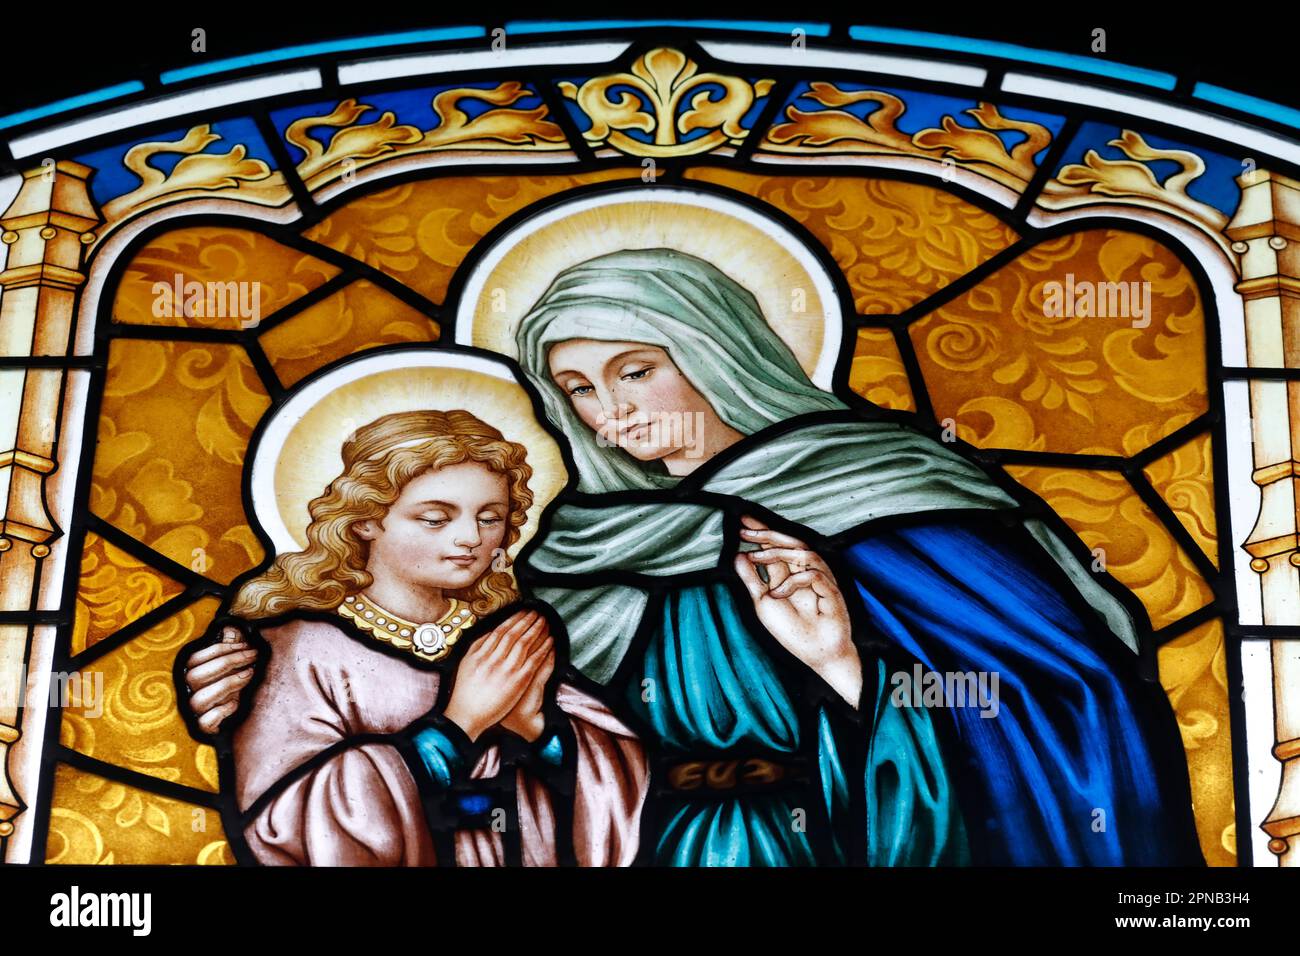 Thi Nghe Church. Stained glass.  St Anna with Virgin Mary. Ho Chi Minh City. Vietnam. Stock Photo